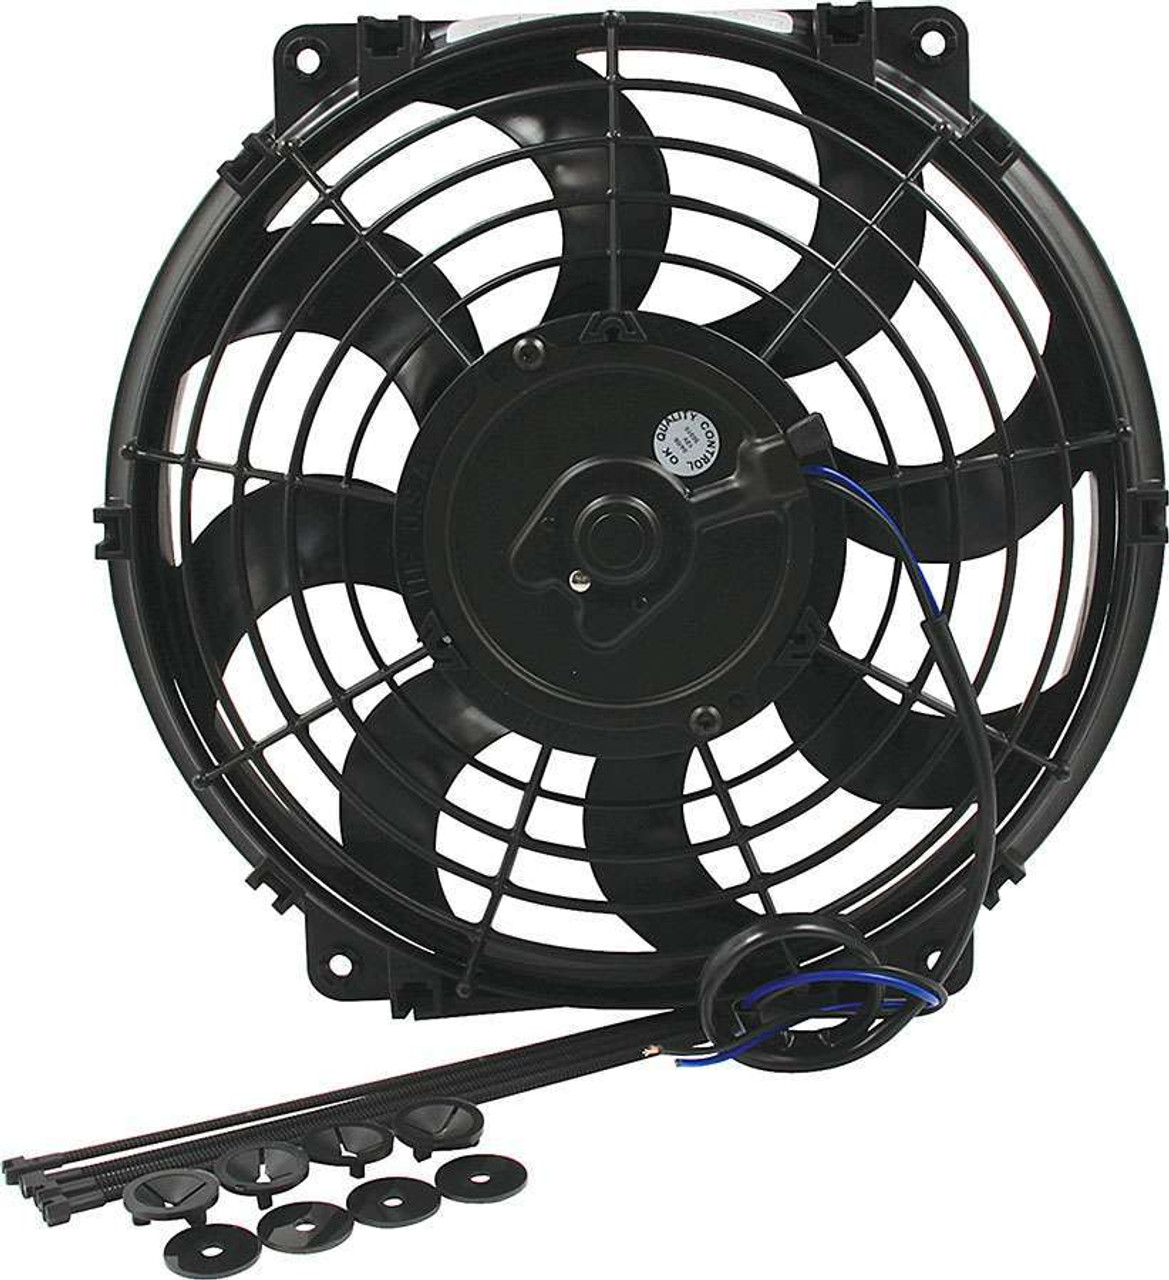 Fan Dimensions 11 x 11-1/2 x 2-1/2. 775 CFM Rating. 5.0 Amp Draw 10IN FAN LENGTH 10IN & 6-3/4 MOUNTING DIMS